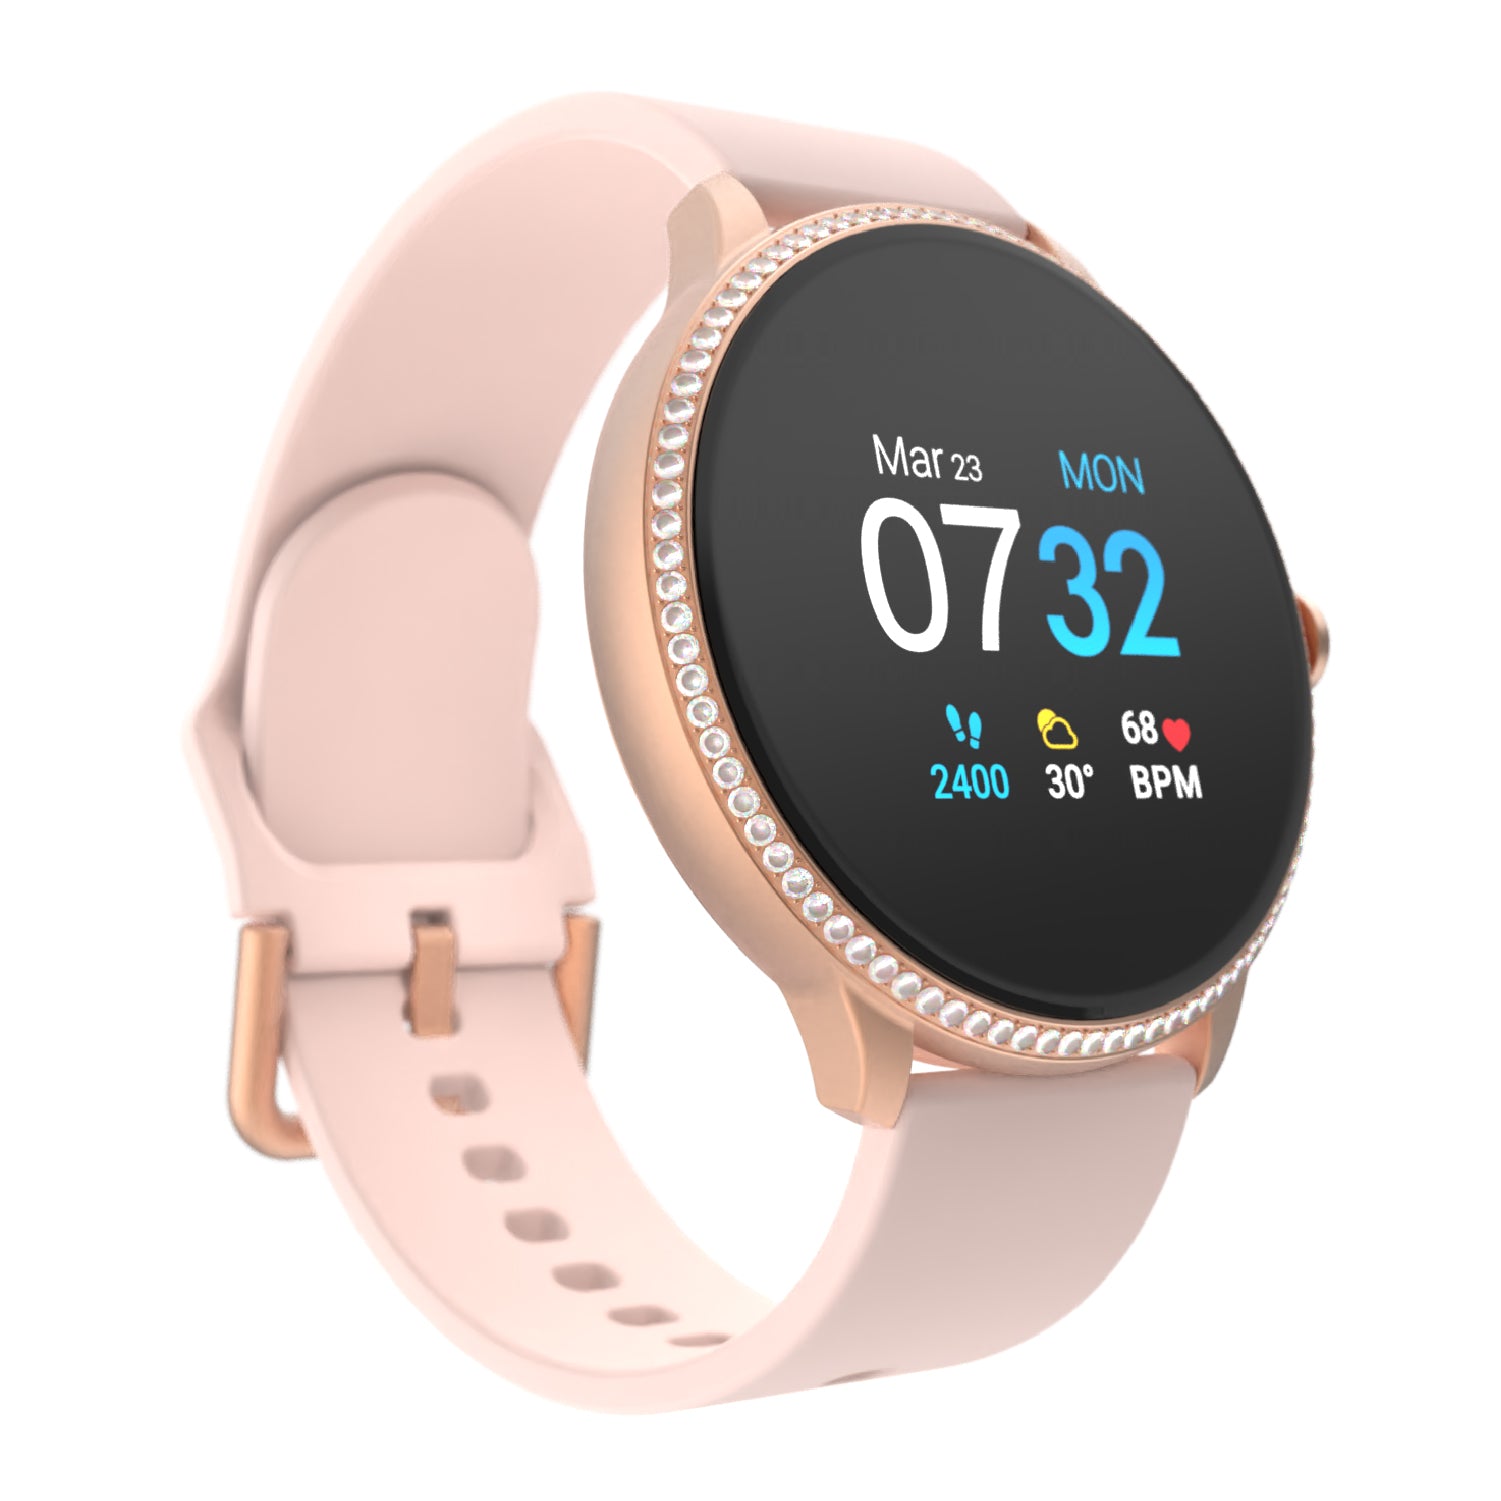 iTouch Sport 3 Smartwatch in Rose Gold Crystal with Blush Strap